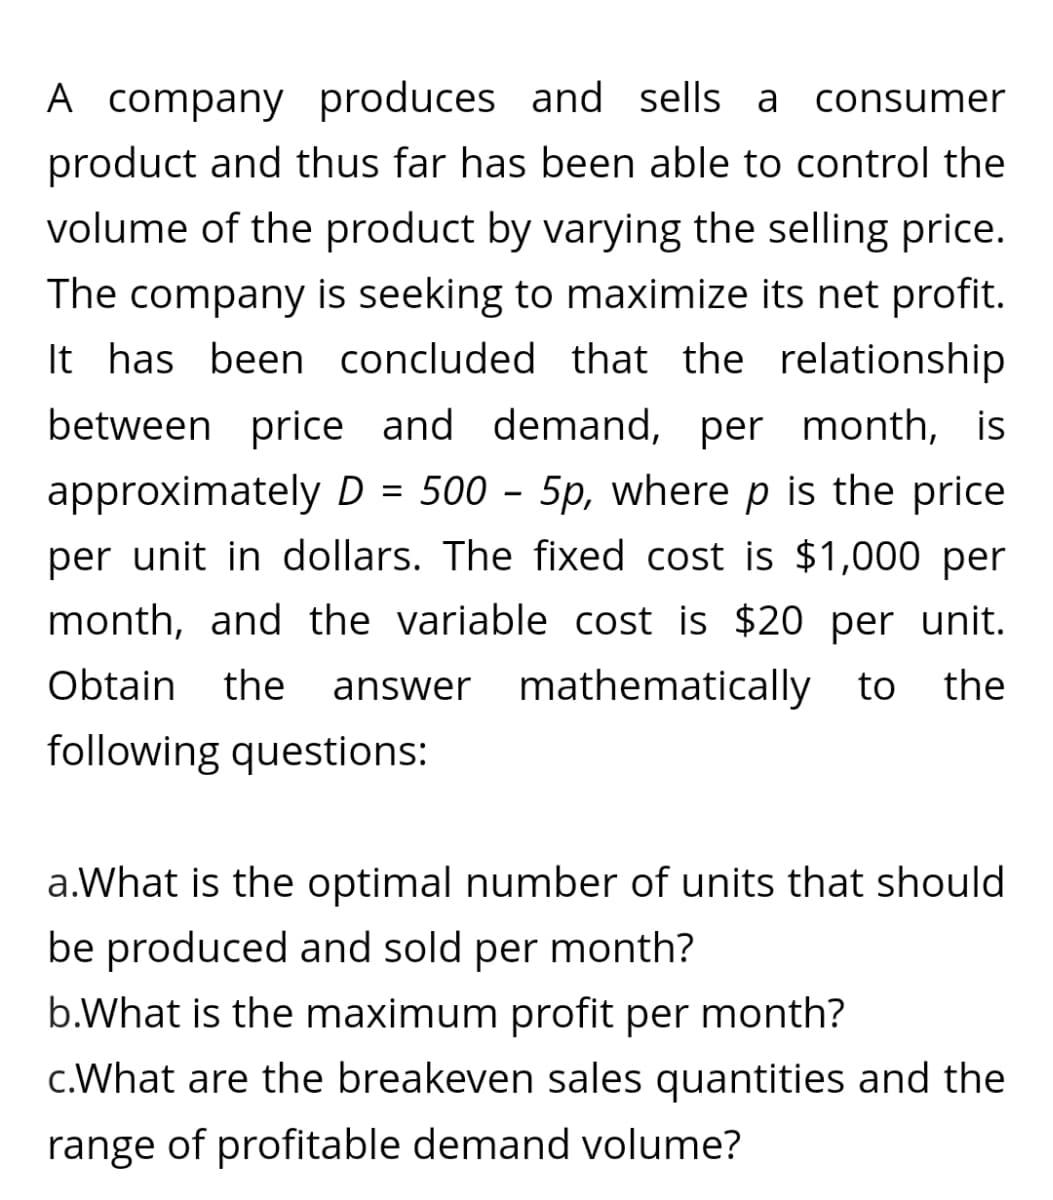 A company produces and sells a consumer
product and thus far has been able to control the
volume of the product by varying the selling price.
The company is seeking to maximize its net profit.
It has been concluded that the relationship
between price and demand, per month, is
approximately D = 500 - 5p, where p is the price
per unit in dollars. The fixed cost is $1,000 per
month, and the variable cost is $20 per unit.
Obtain the answer mathematically to the
following questions:
a.What is the optimal number of units that should
be produced and sold per month?
b.What is the maximum profit per month?
c.What are the breakeven sales quantities and the
range of profitable demand volume?